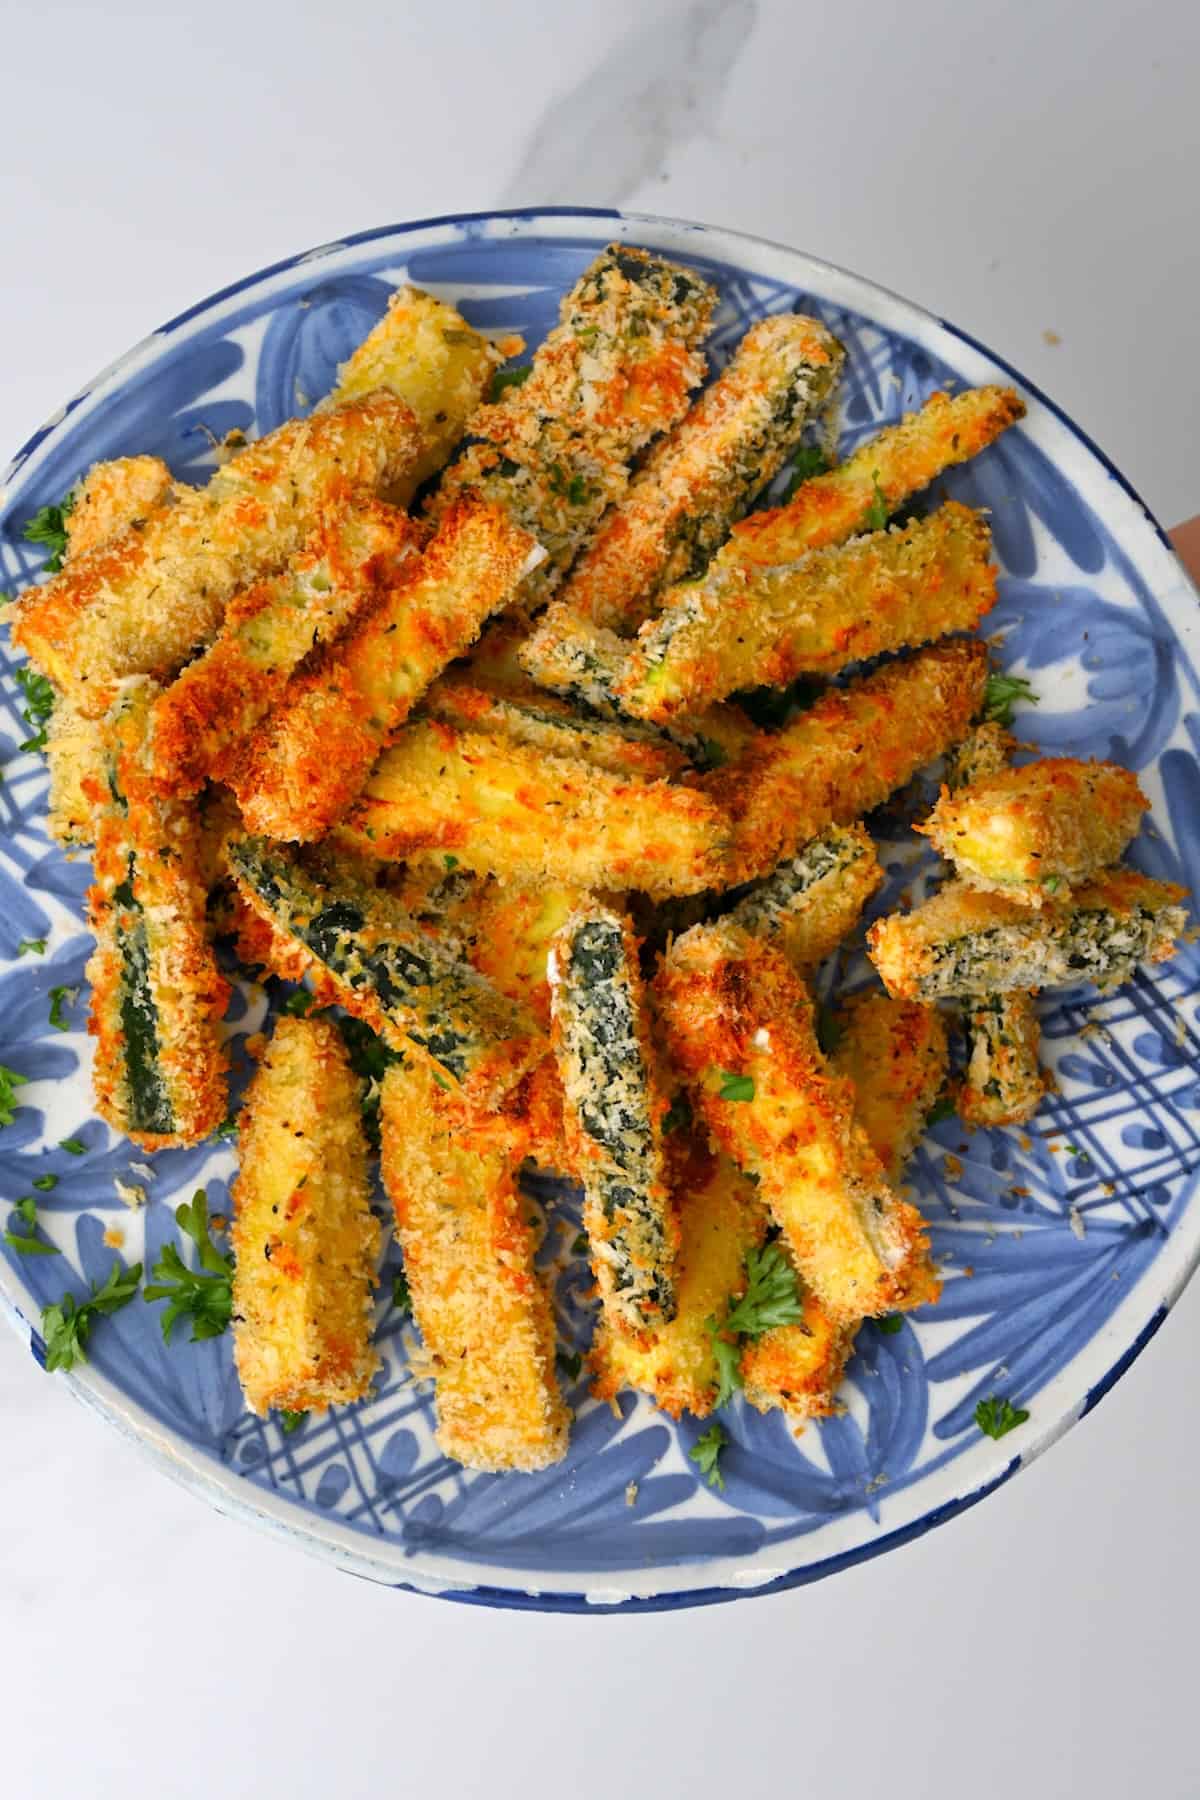 Zucchini fries on a blue plate